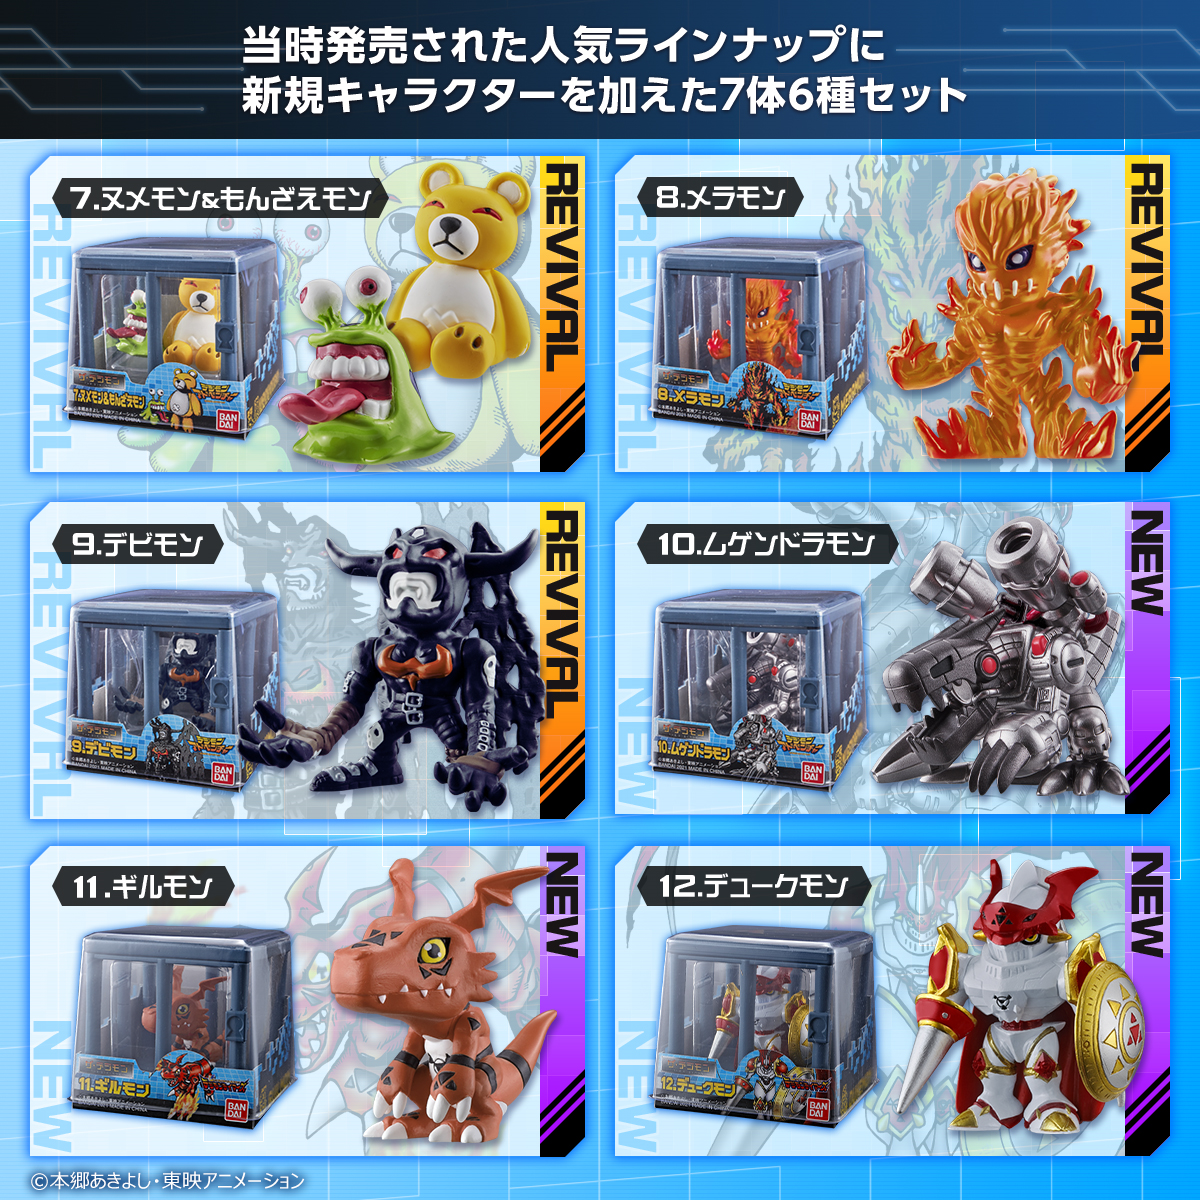 THE DIGIMON NEW COLLECTION Vol.2